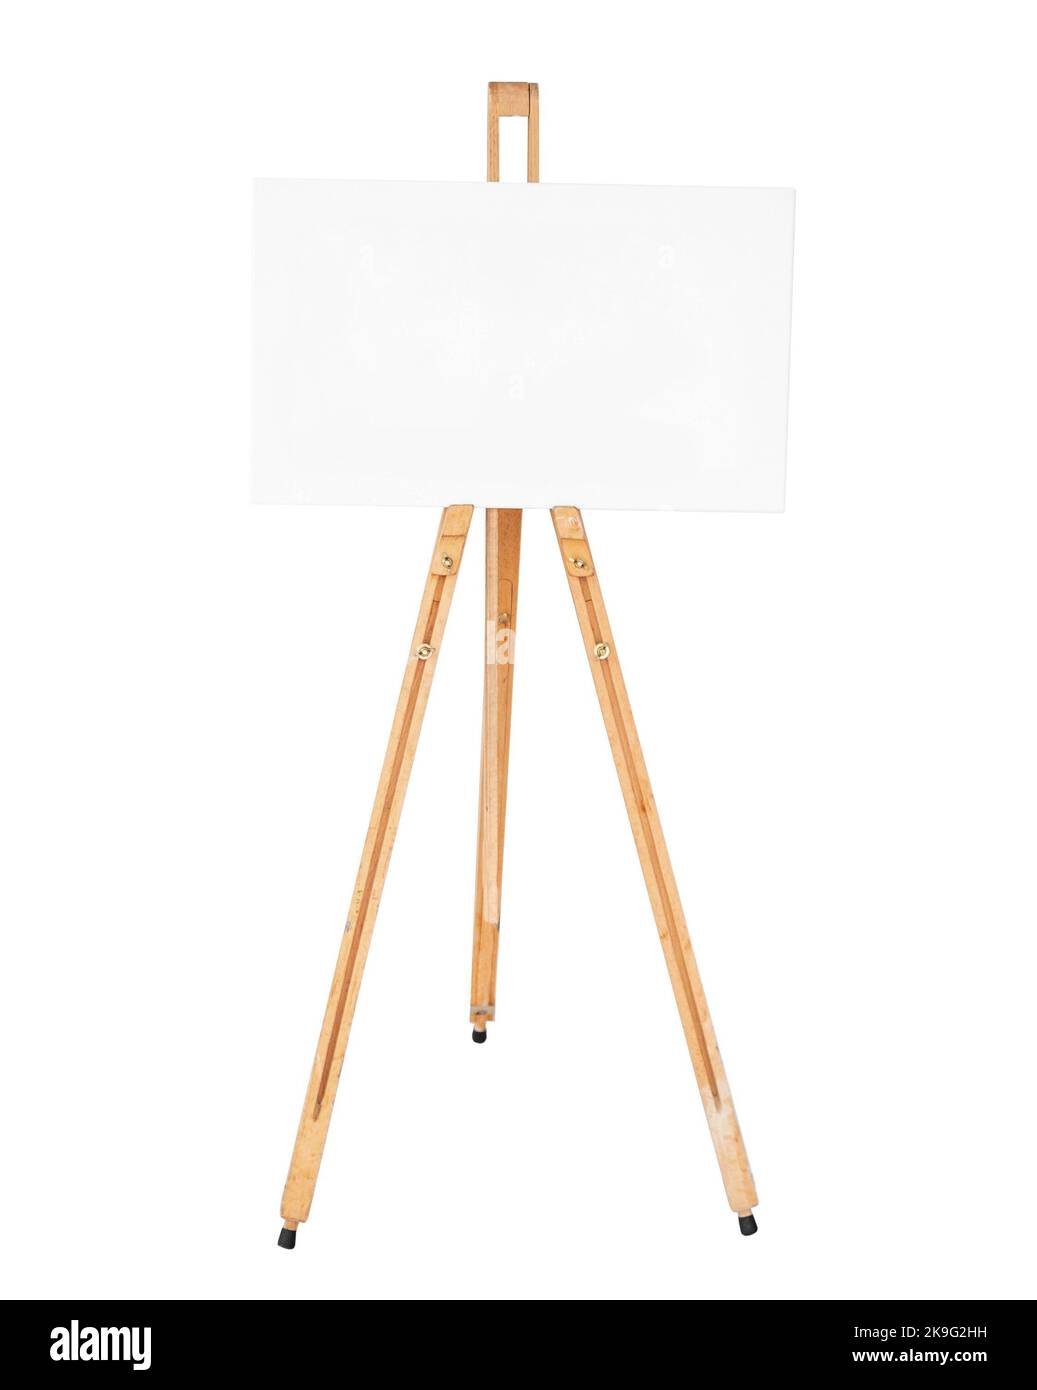 Small Easel On White Background Stock Photo, Picture and Royalty Free  Image. Image 83010990.